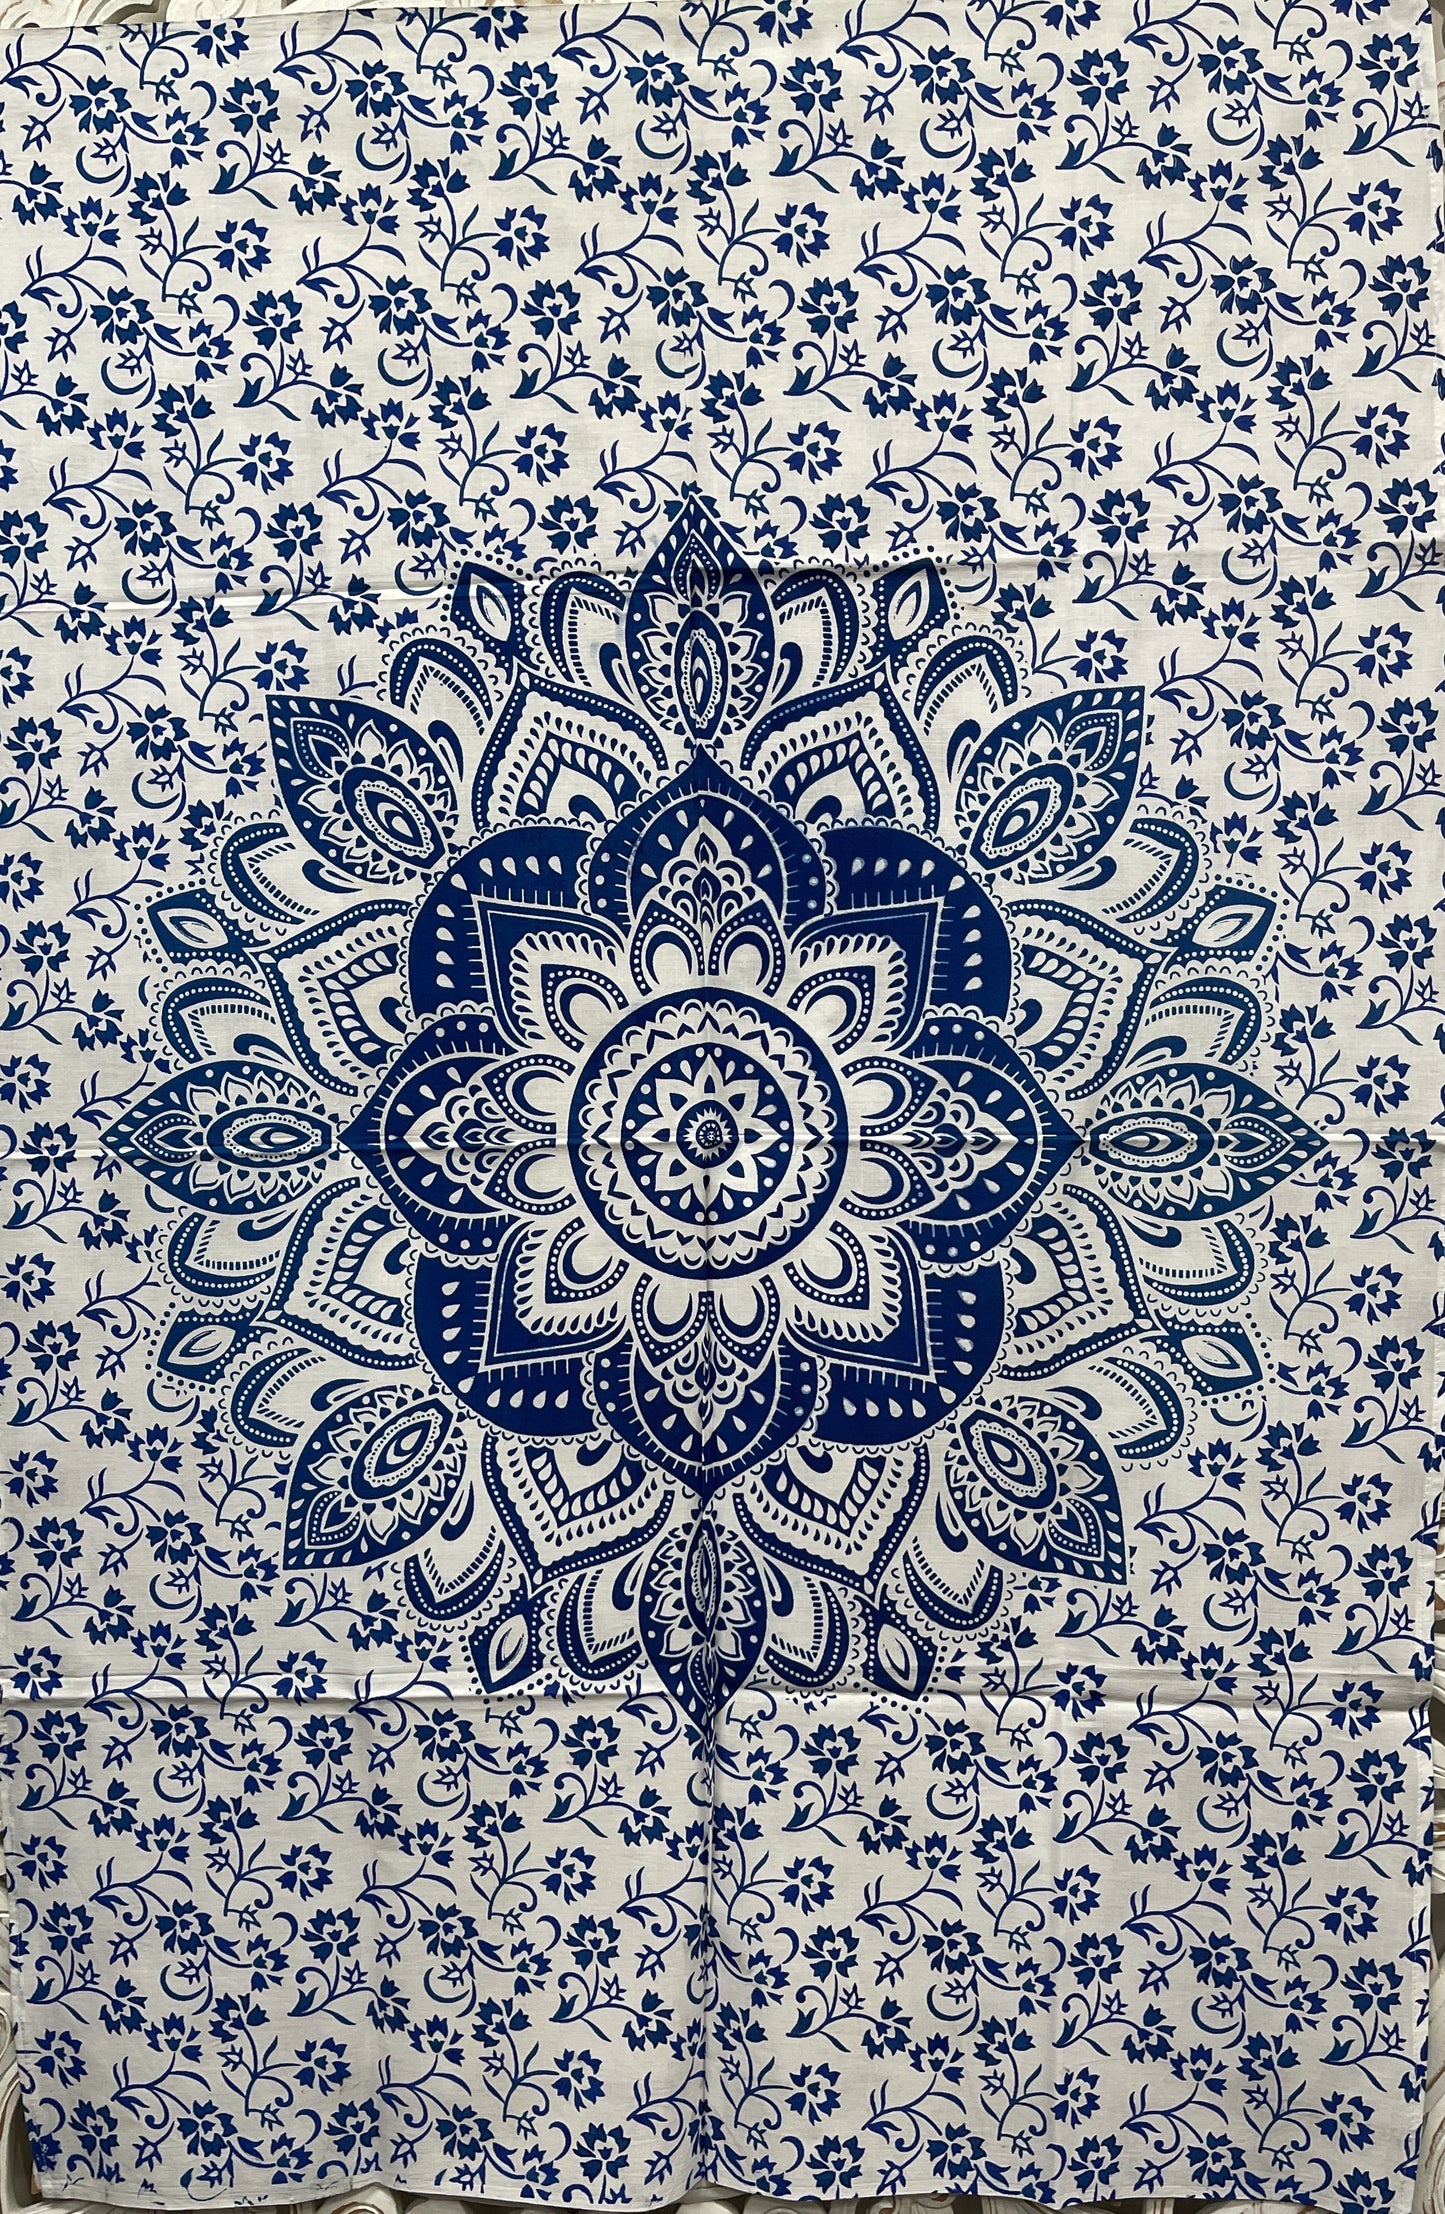 Hand printed Floral Mandala Fabric Poster Tapestries- 3 Colors Available